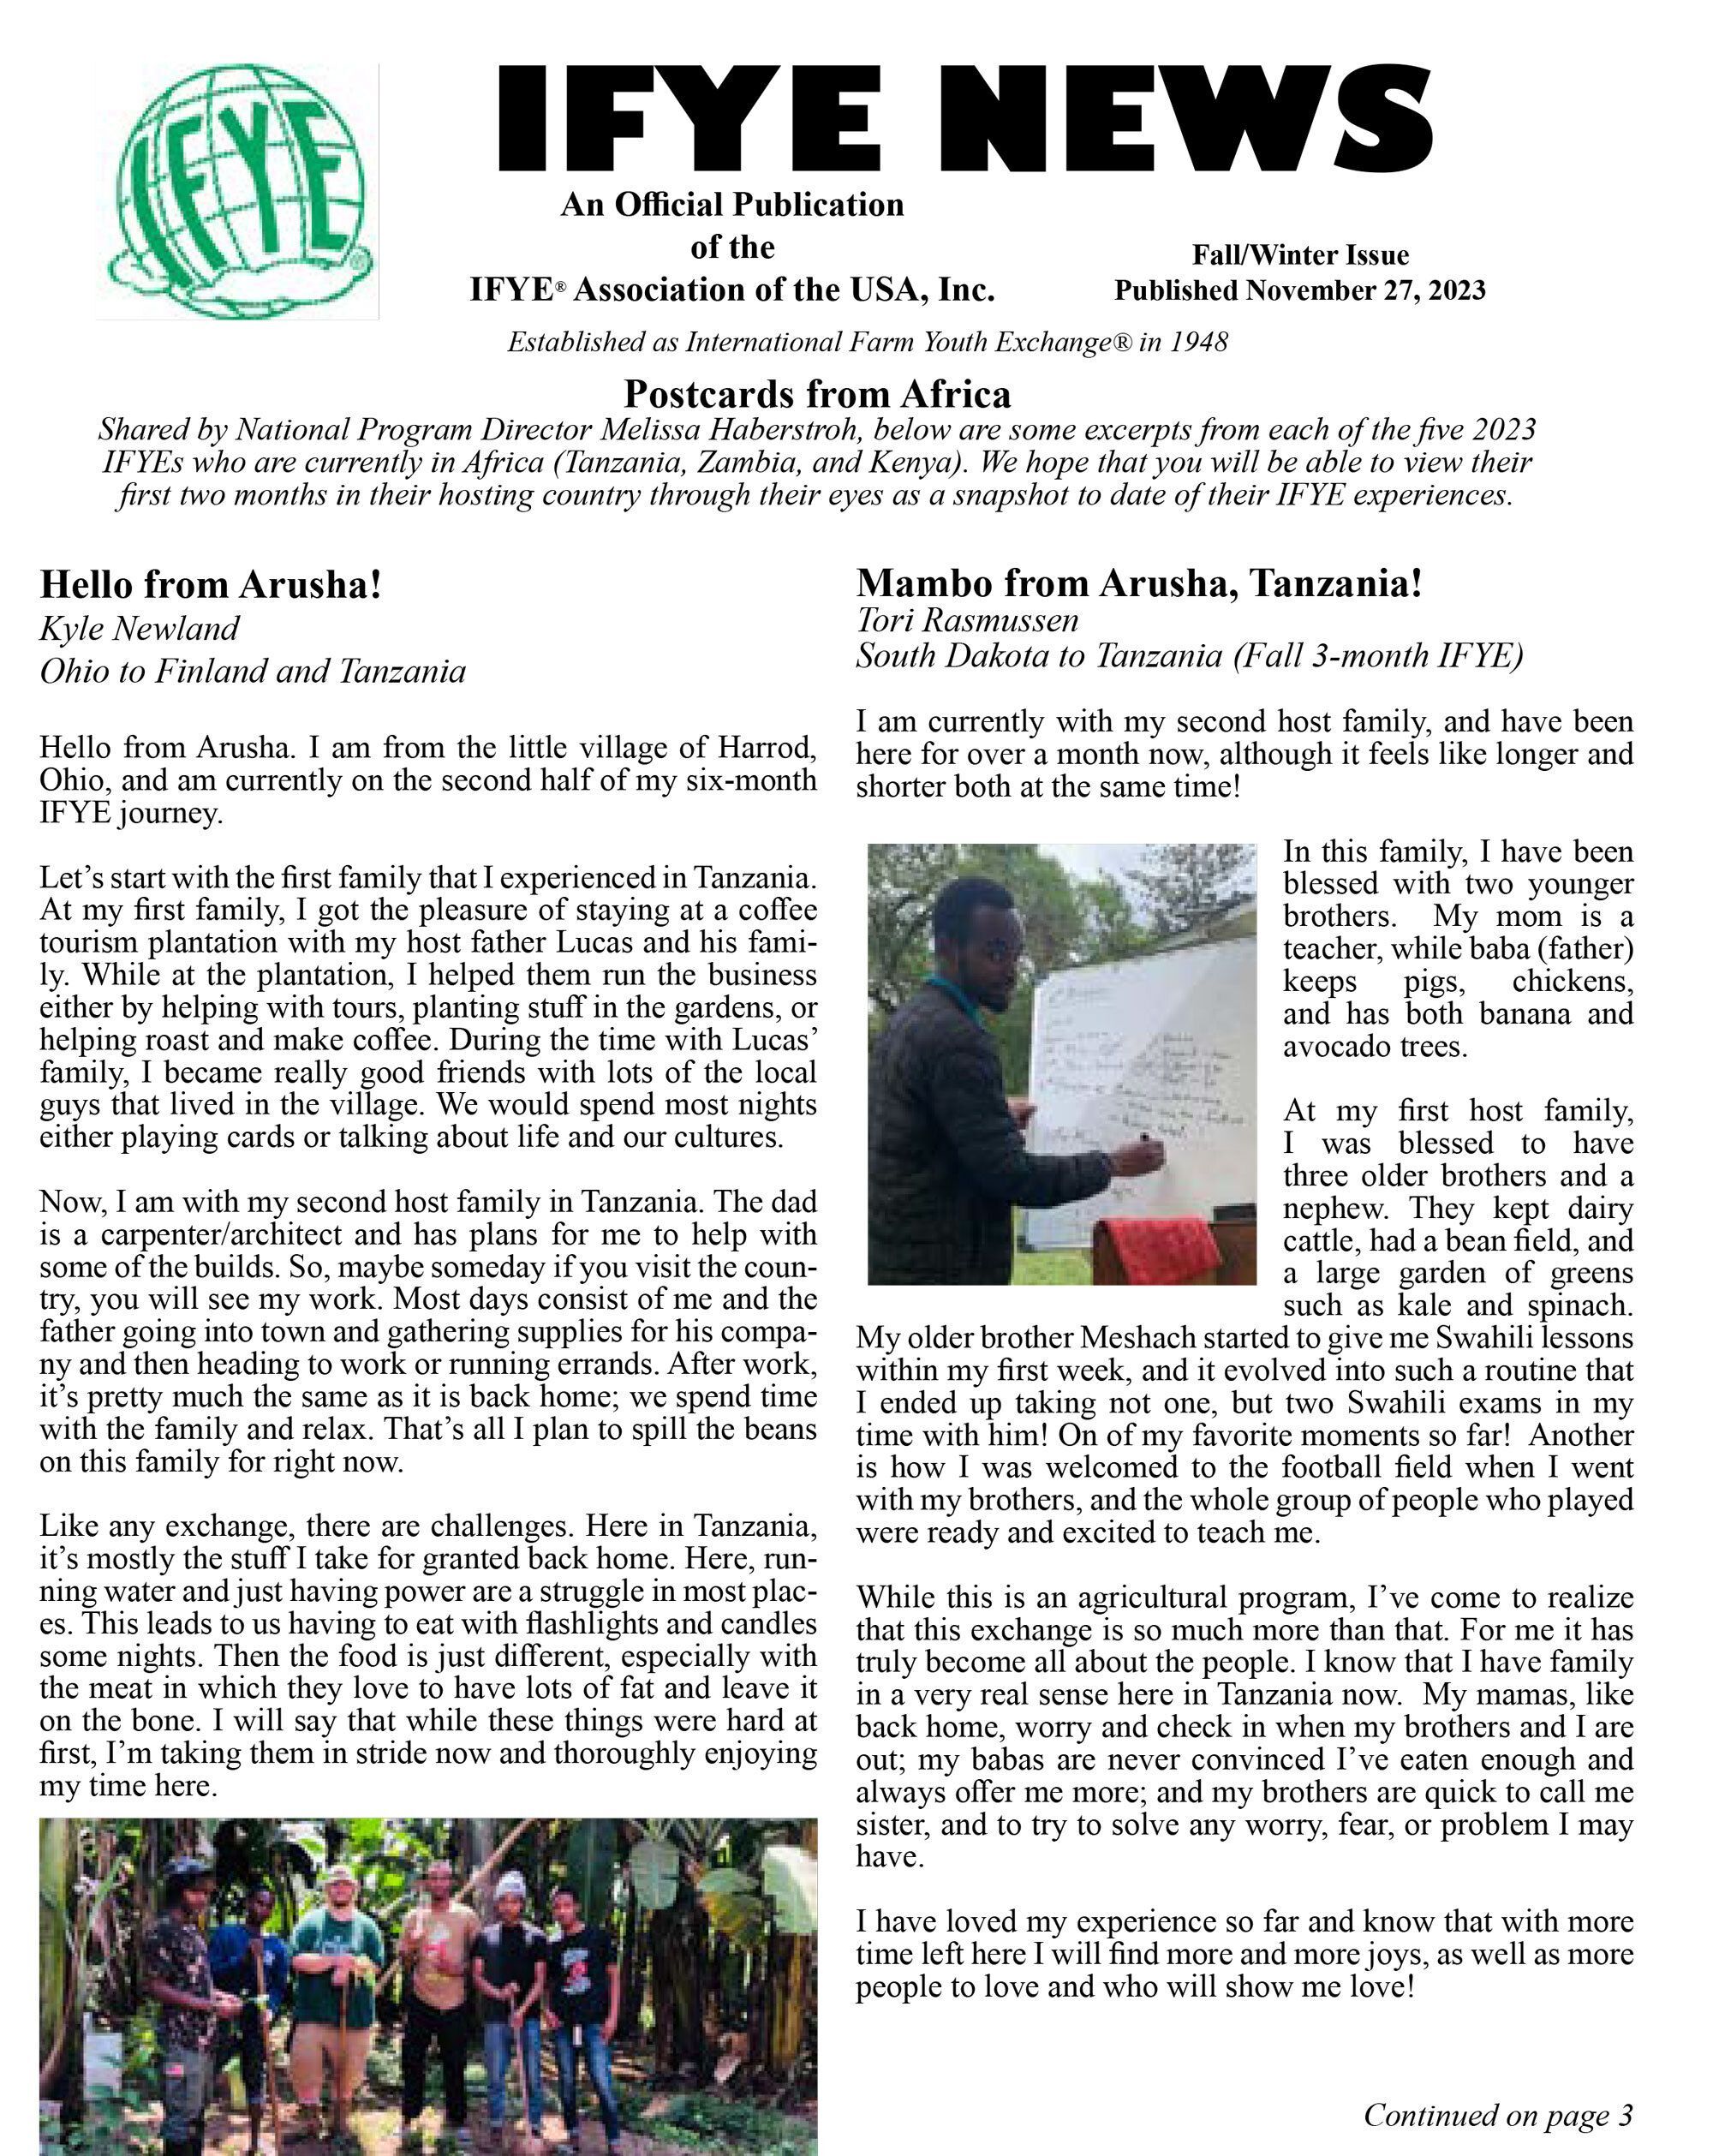 Read the Fall/Winter 2023 Newsletter